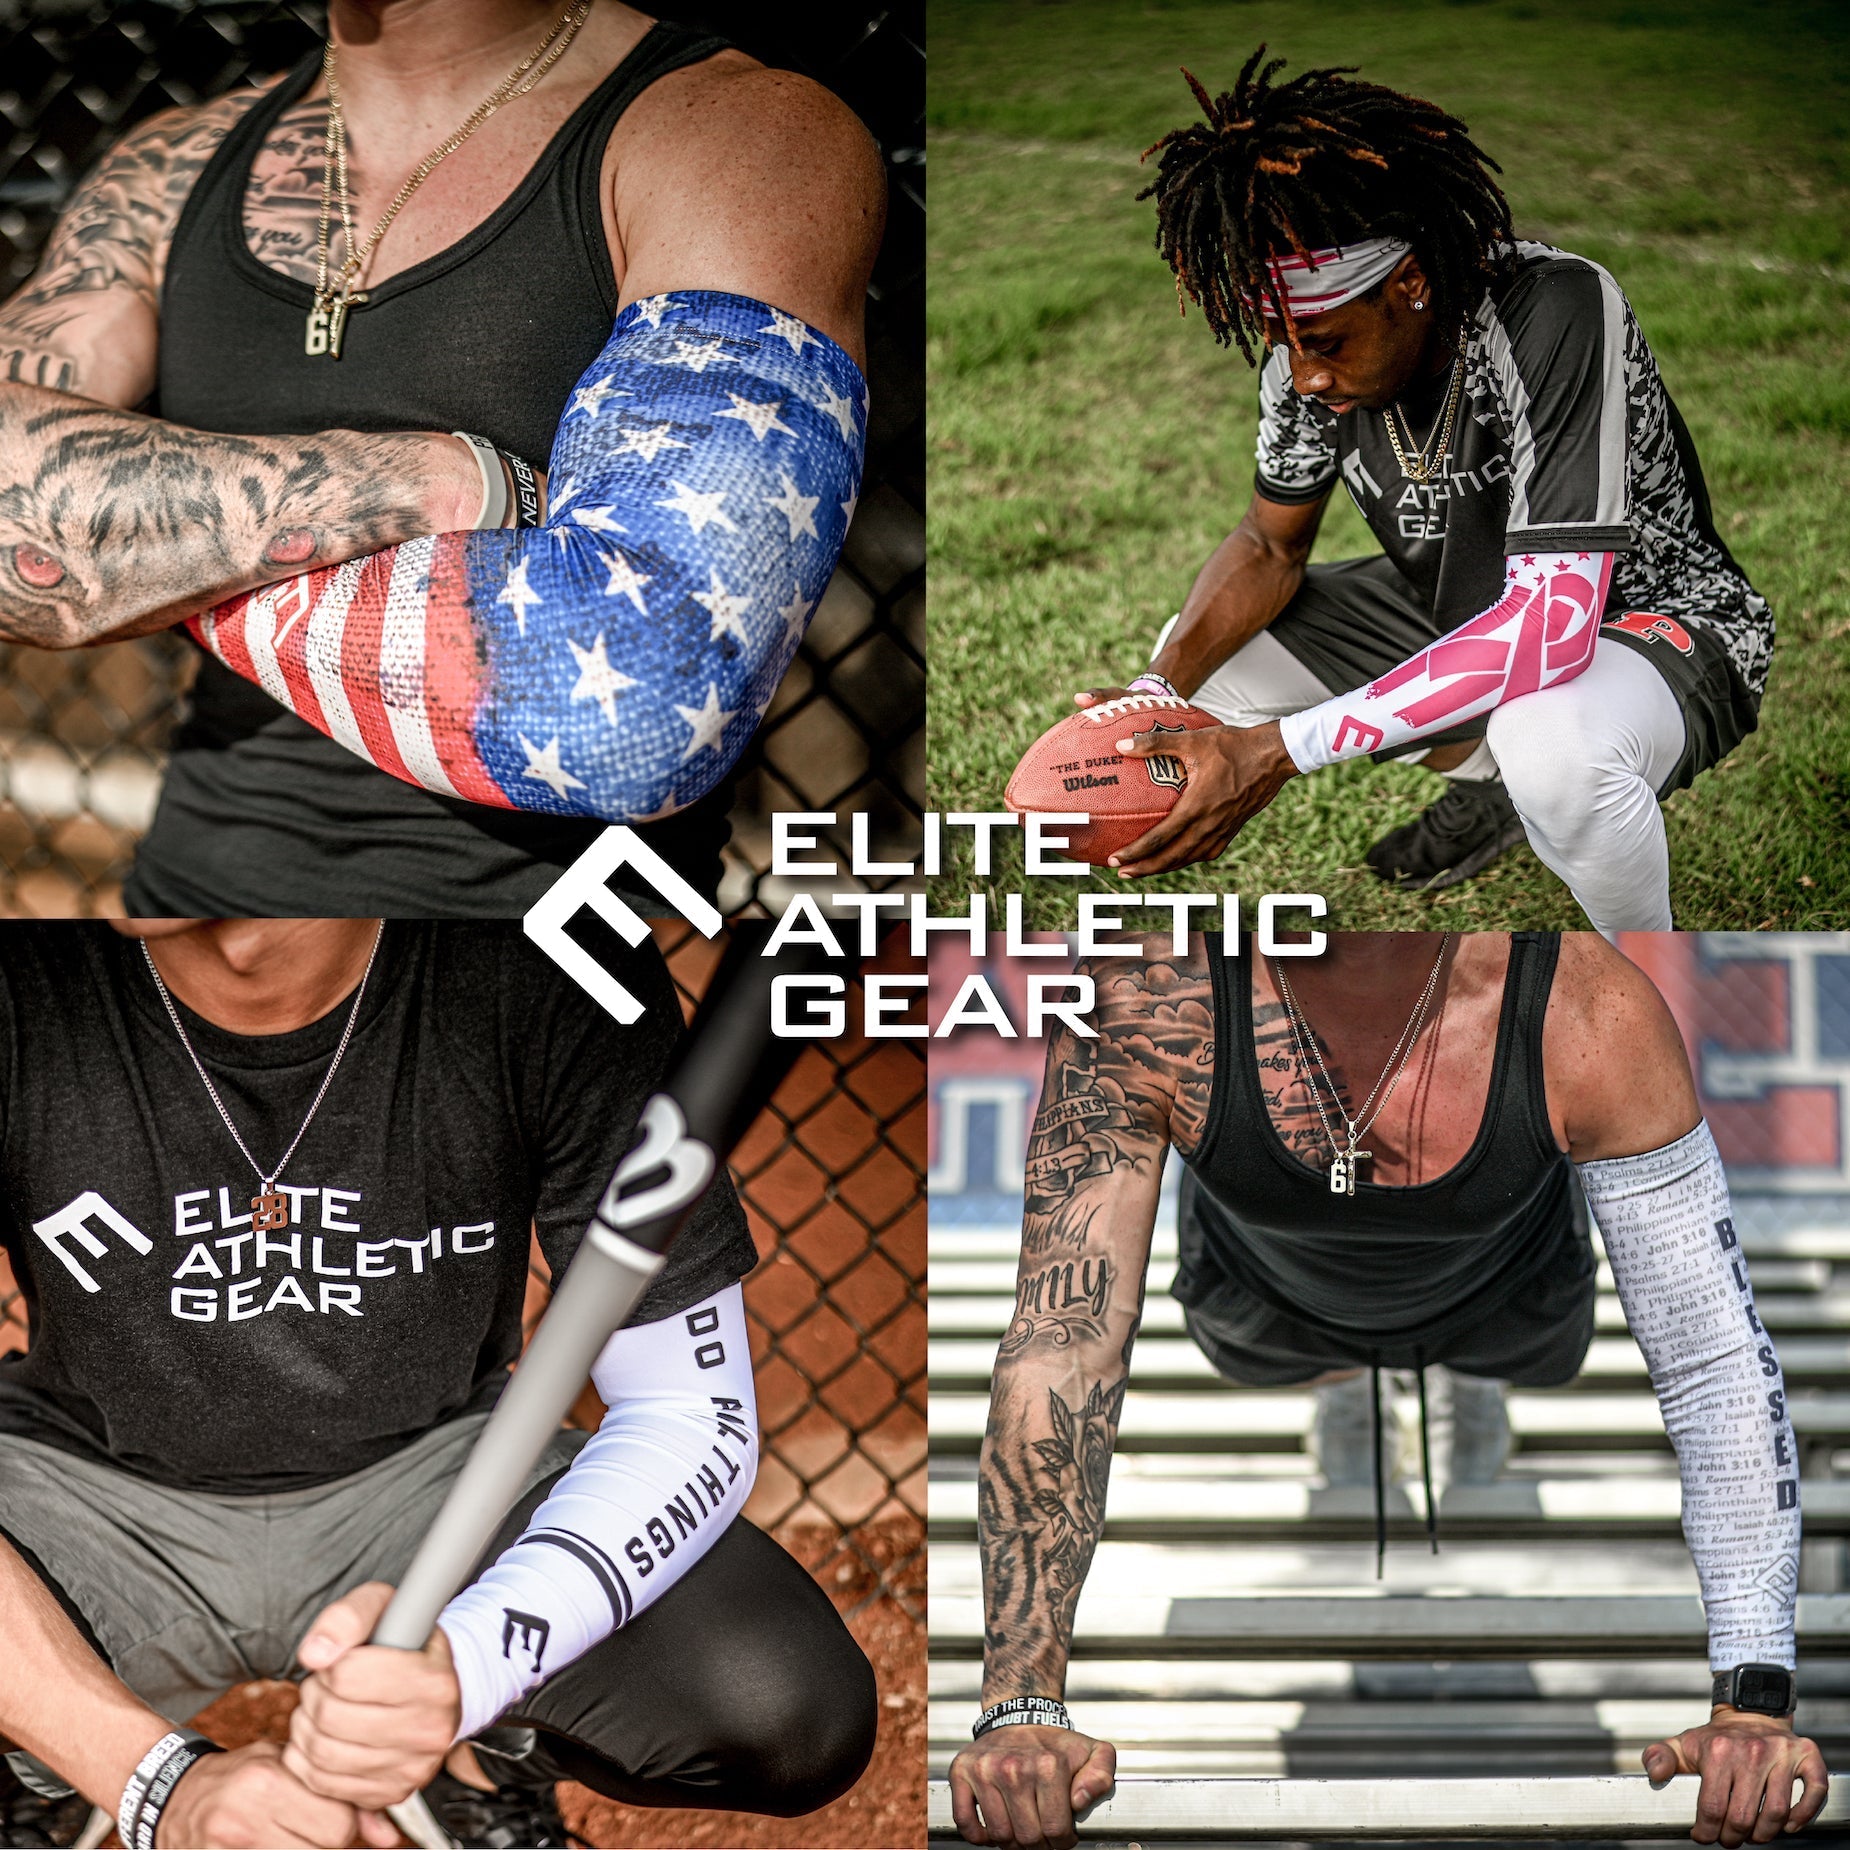 Leader Of The Pack Arm Sleeve - Maximum Velocity Sports